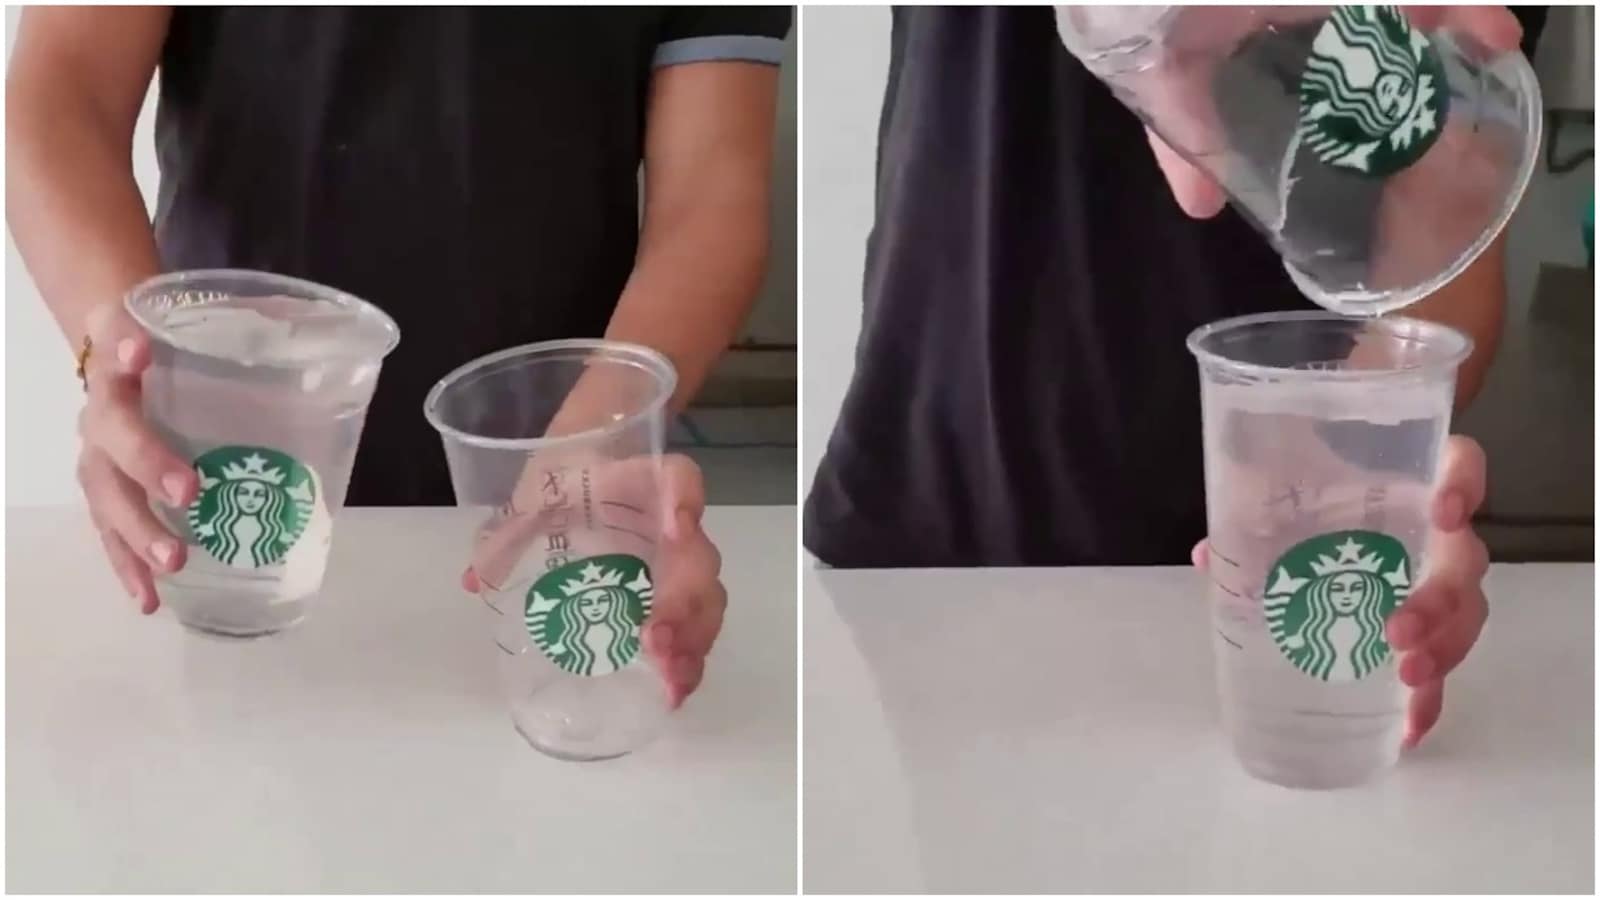 Verify: Is Starbucks actually using more plastic to get rid of